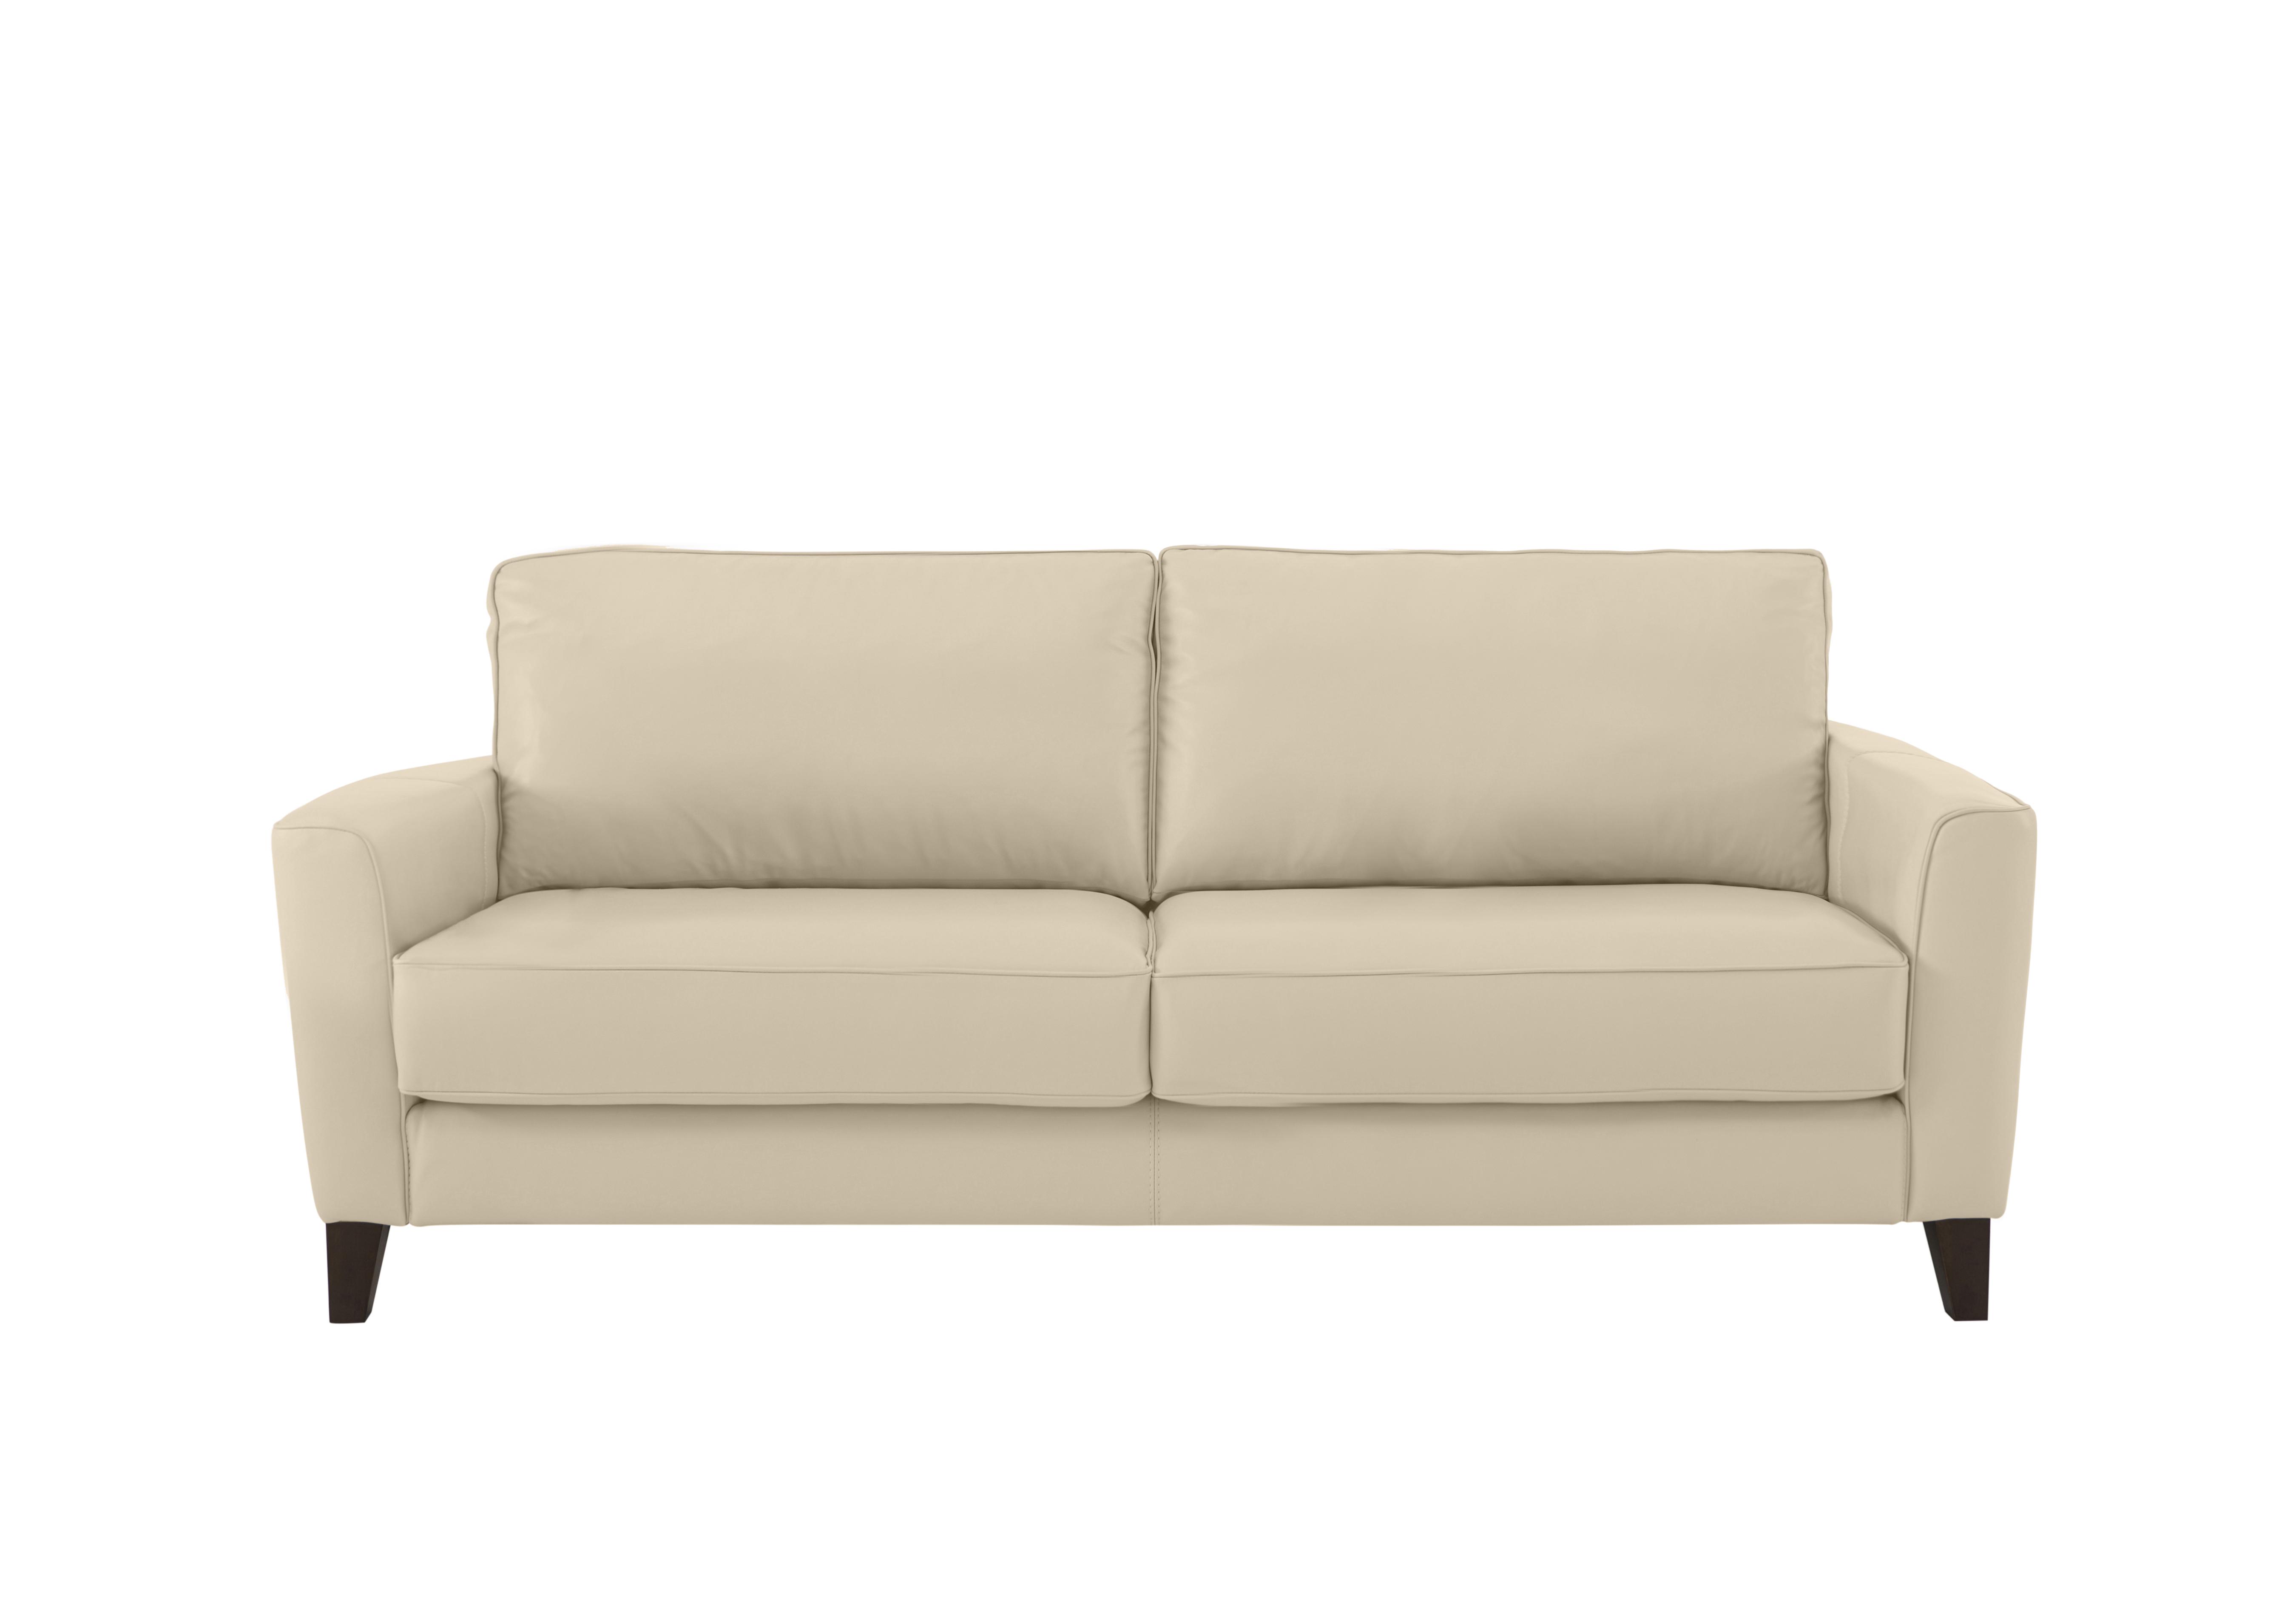 Brondby 3 Seater Leather Sofa in Bv-862c Bisque on Furniture Village